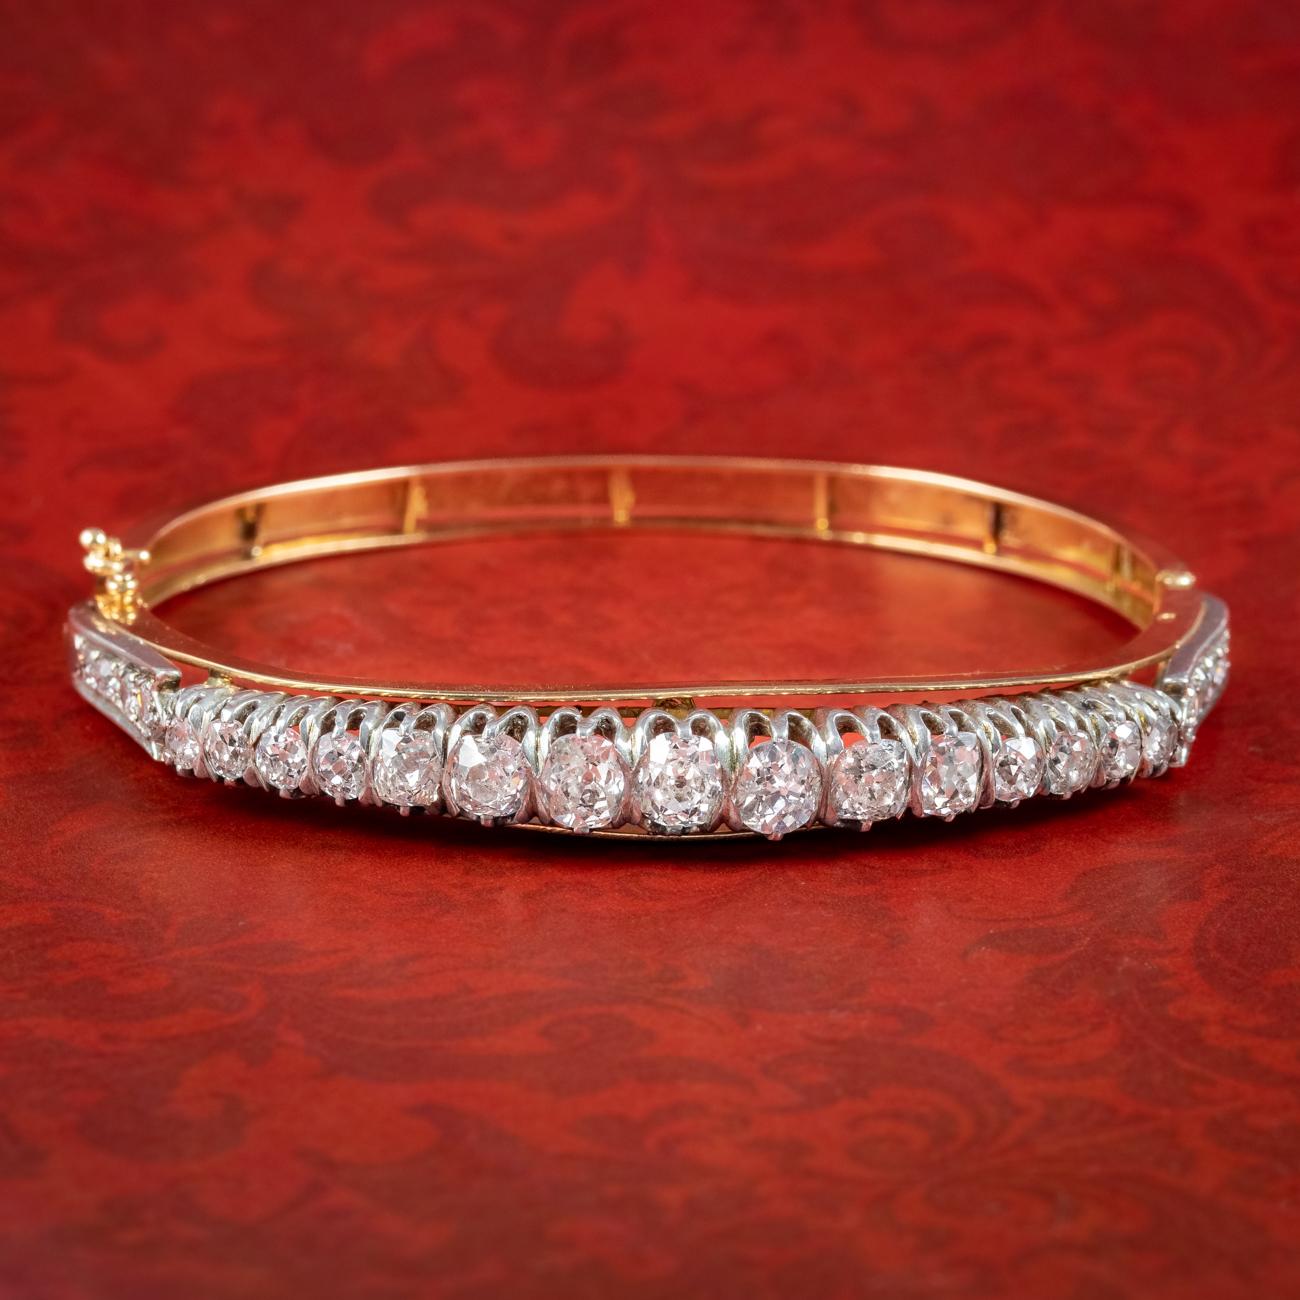 A magnificent antique French bangle from the late 19th Century lined with twenty-three old chunky cushion cut diamonds that graduate in size from 0.06ct stones on the shoulders to 0.50ct stones in the centre (approx. 4.5ct total). 


Diamonds are